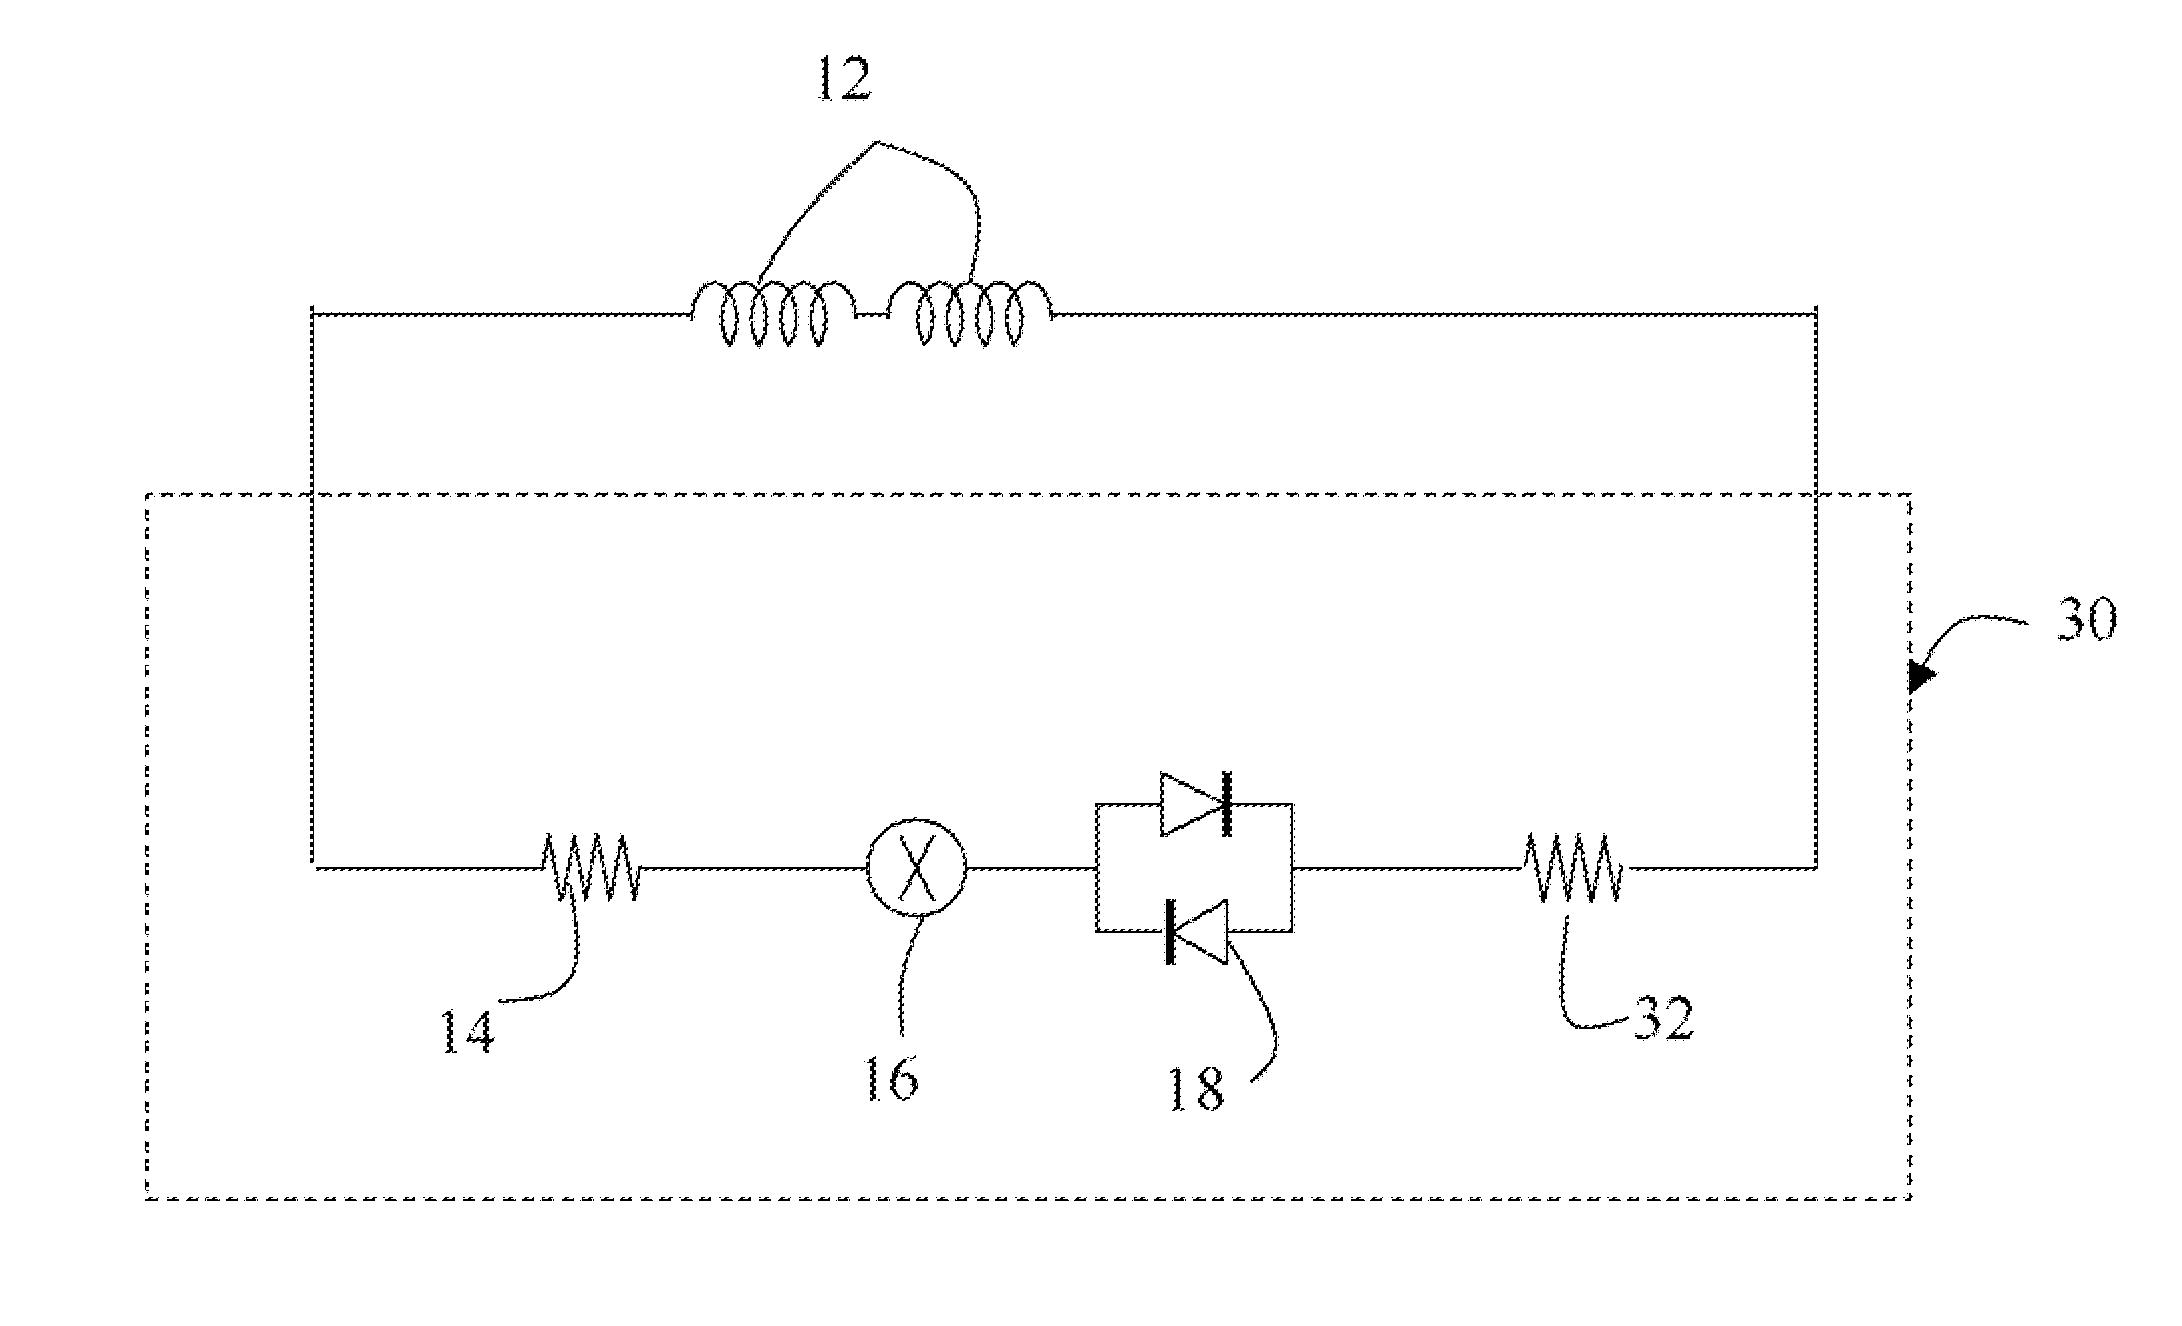 Quench protection circuit for superconducting magnet coils